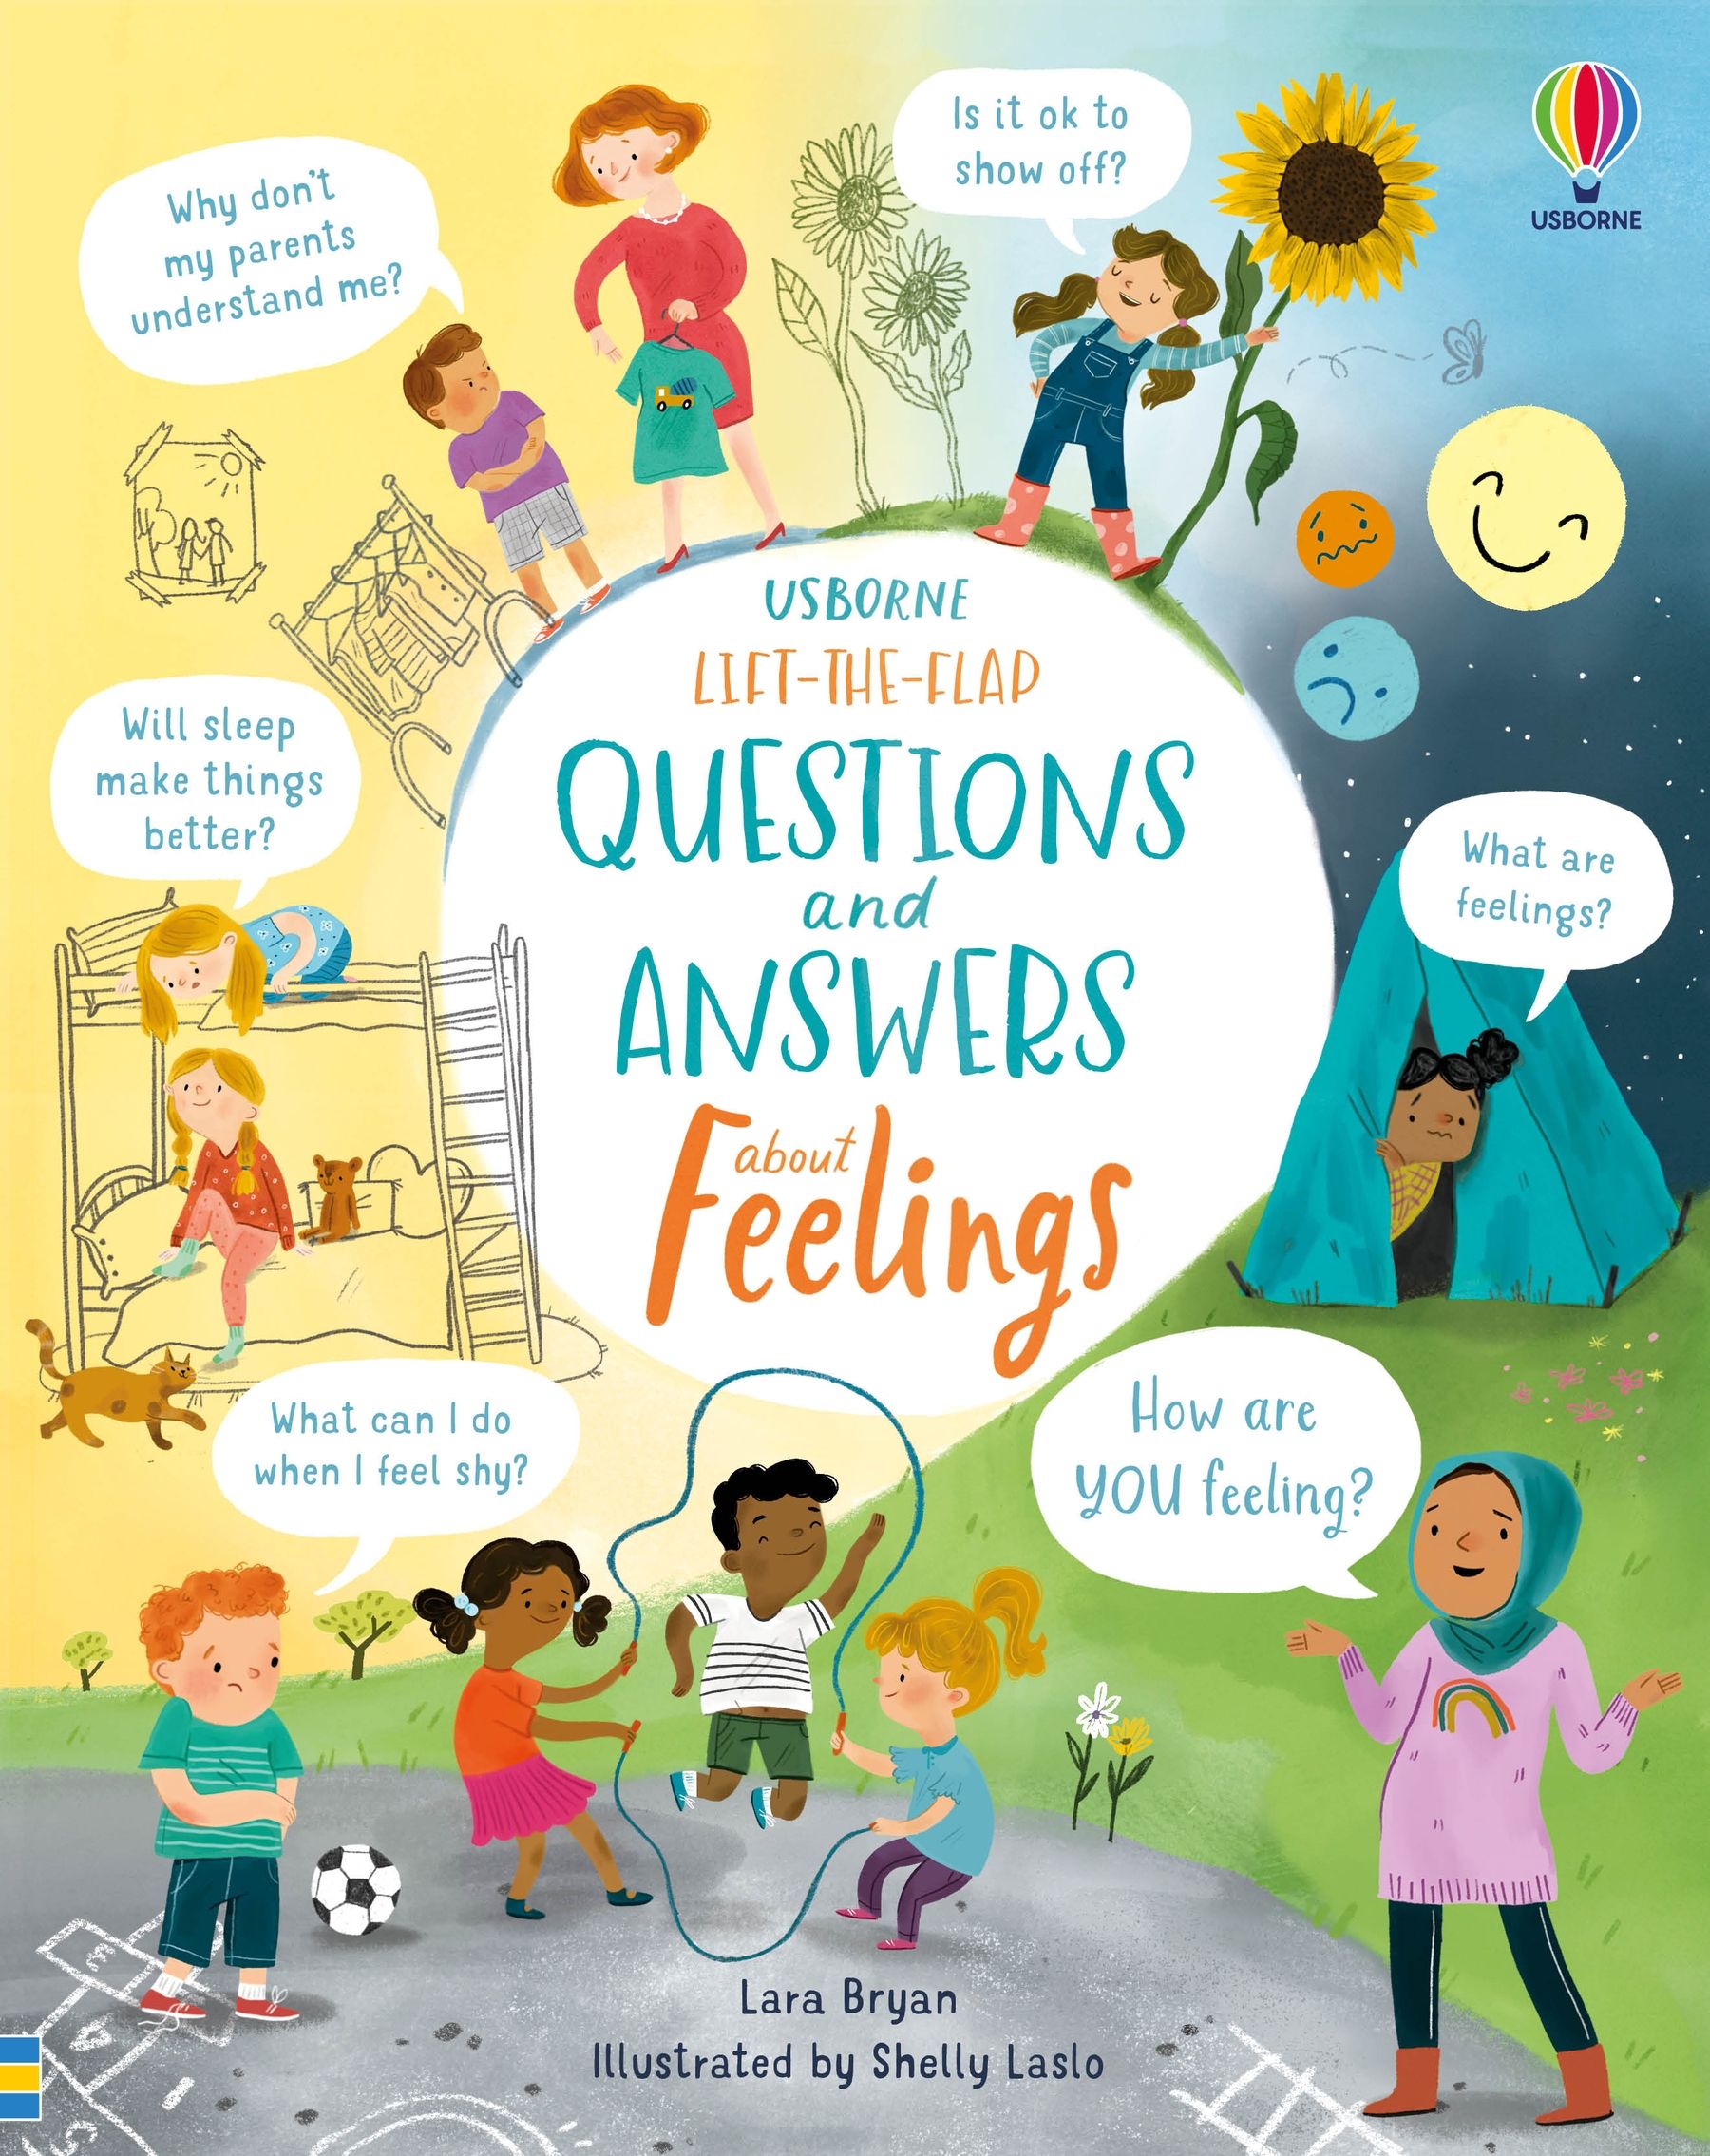 Lift-the-Flap Questions and Answers About Feelings | Lara Bryan image13